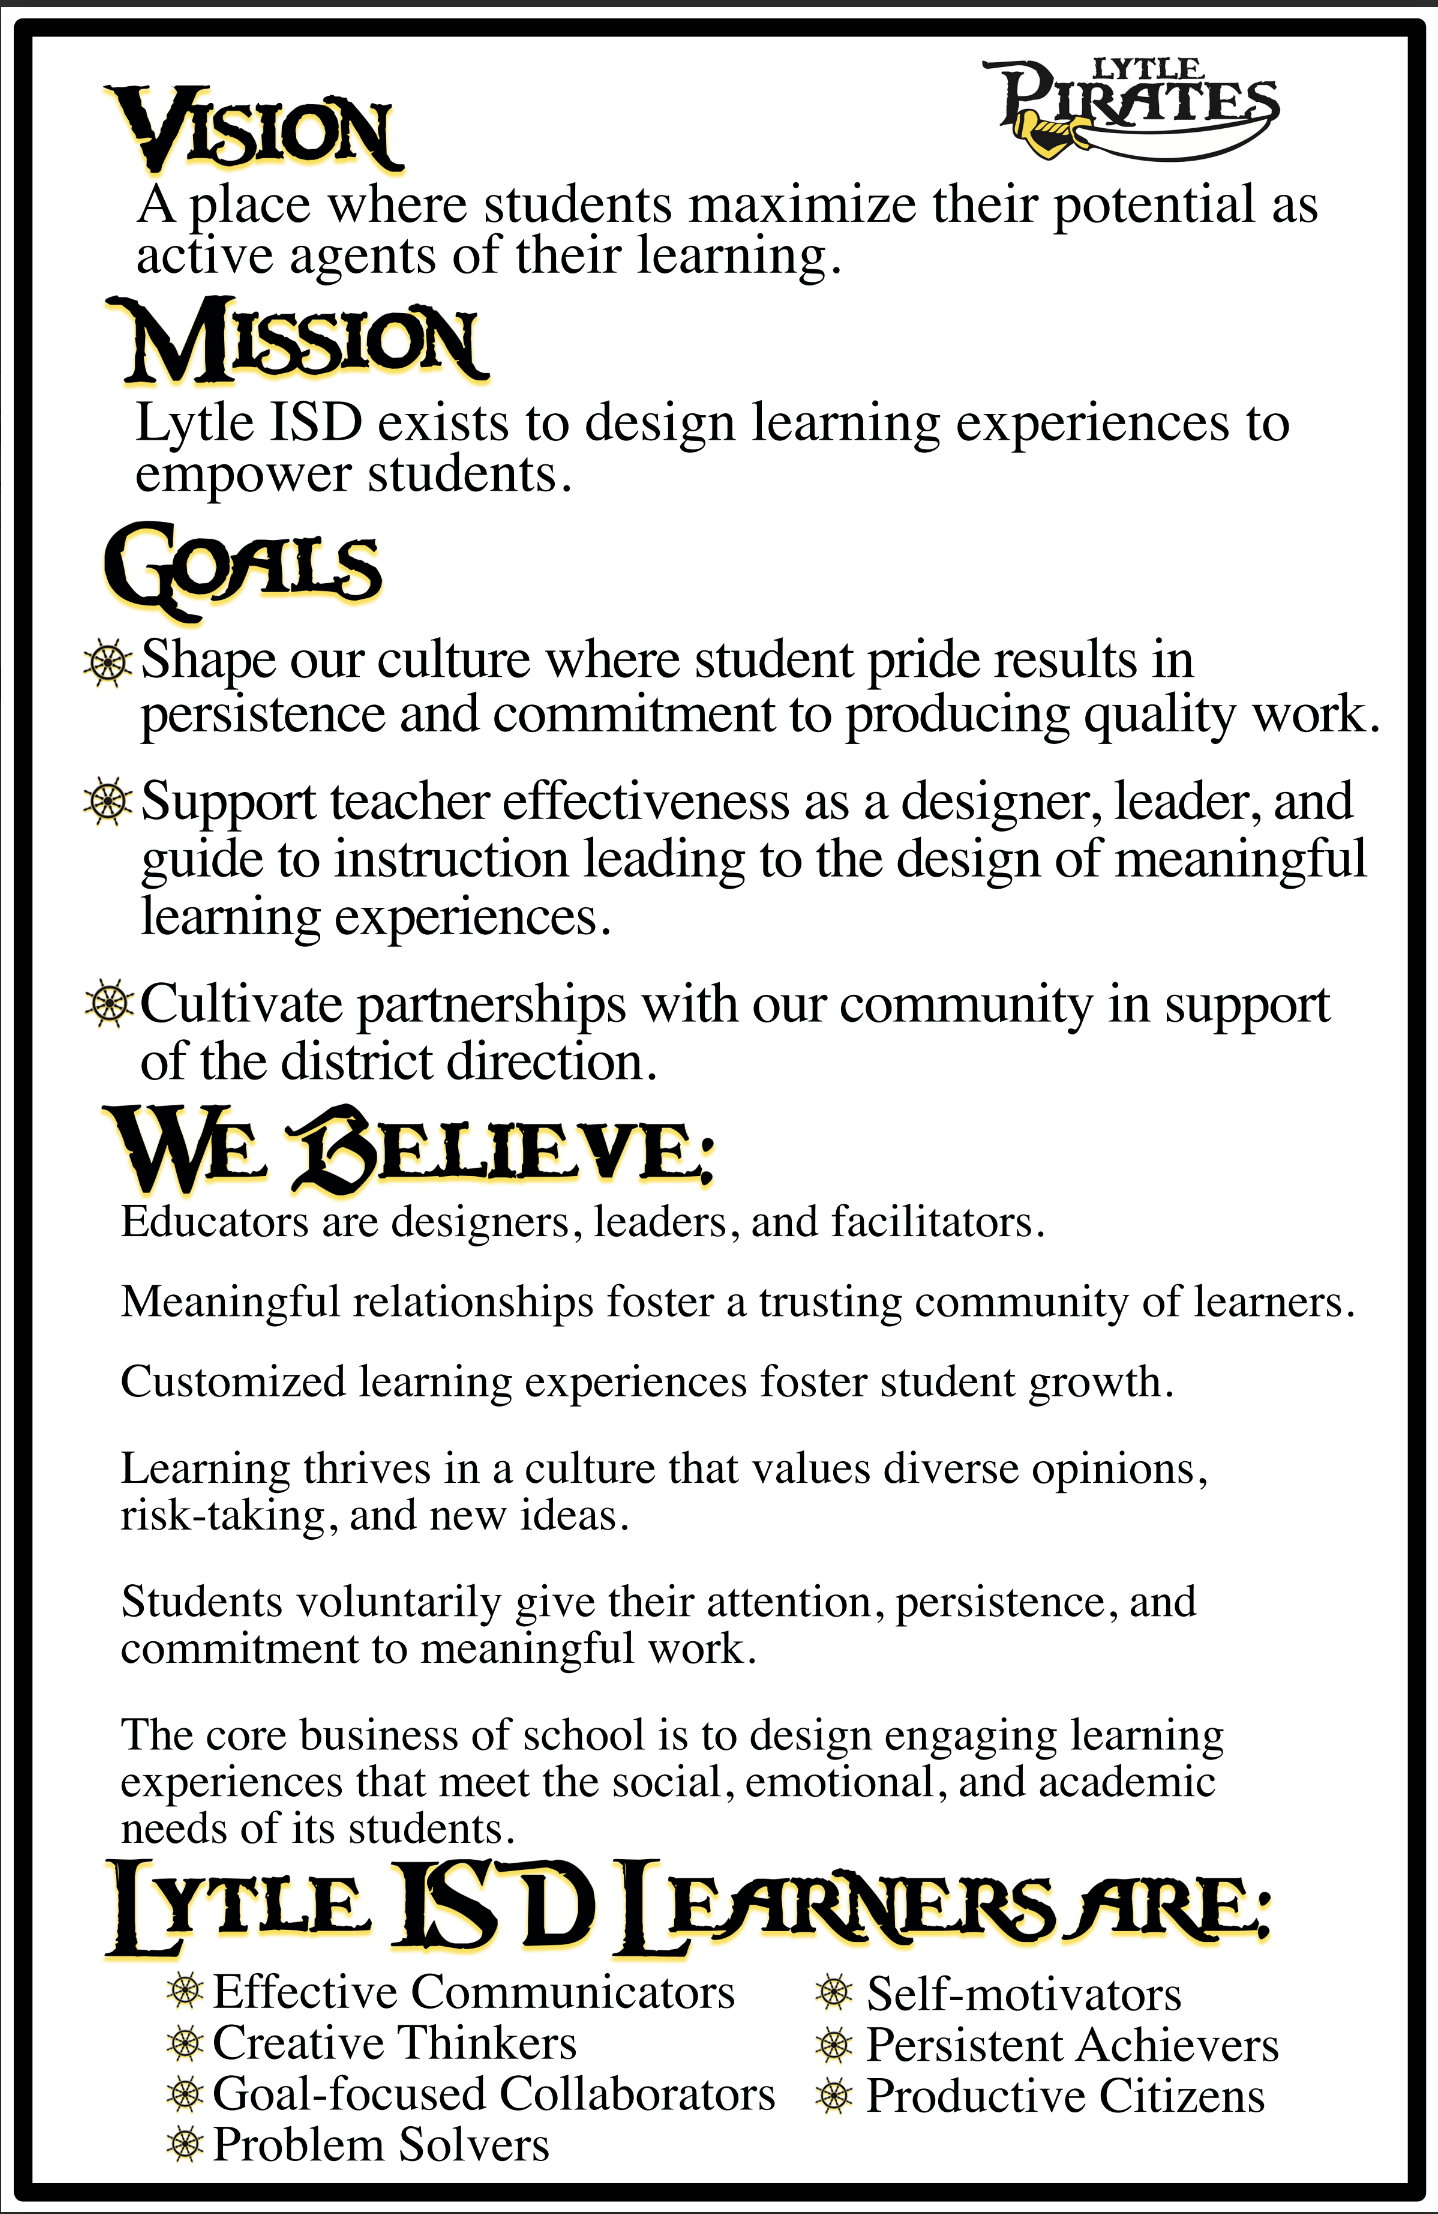 Lytle ISD Vision, Mission, Goals